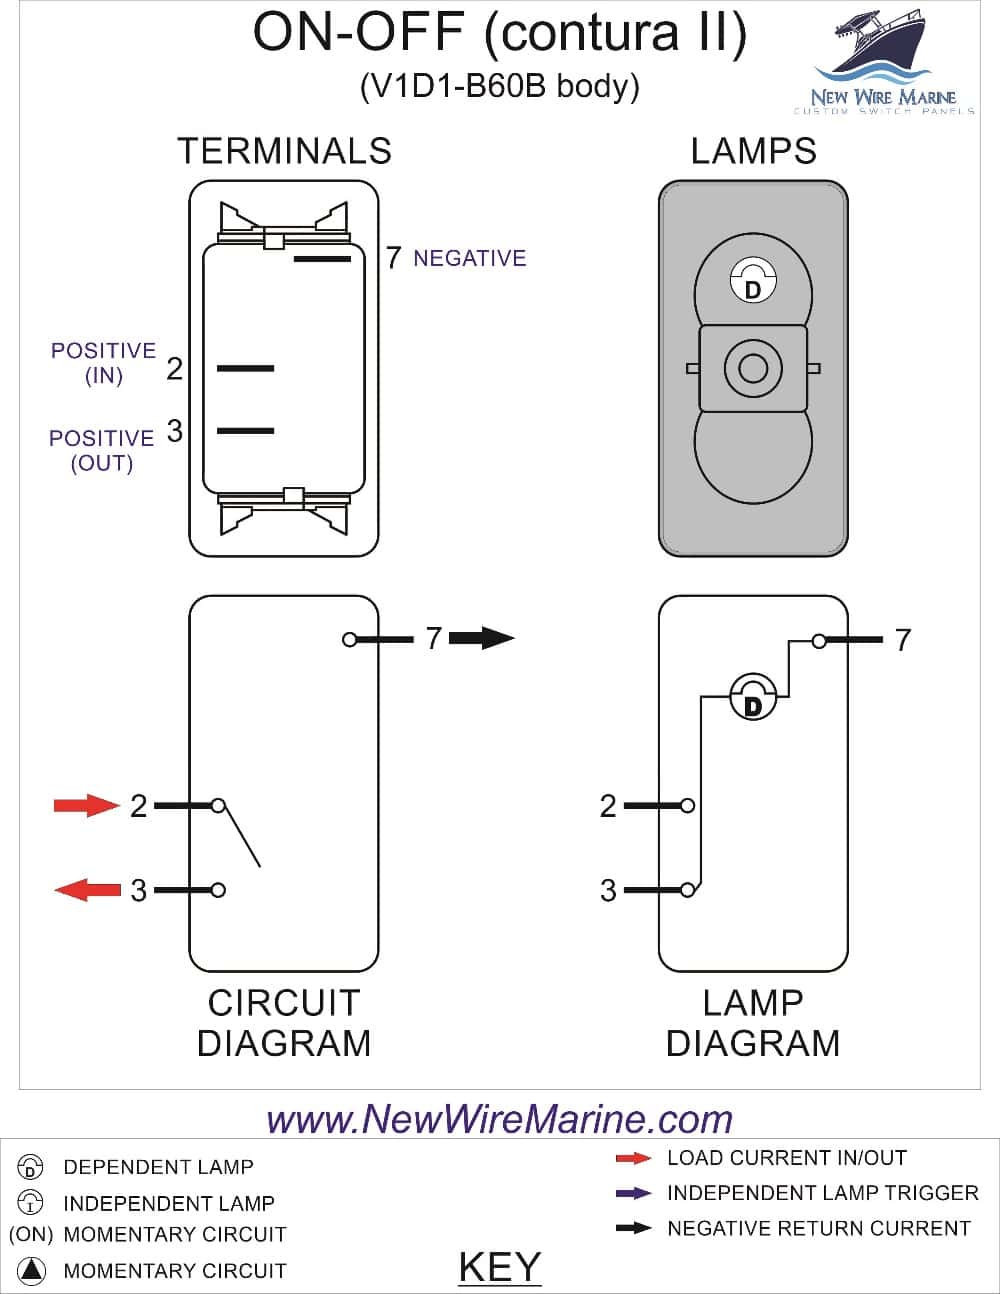 Rocker Switch Wiring Diagrams | New Wire Marine - Carling Switches Wiring Diagram